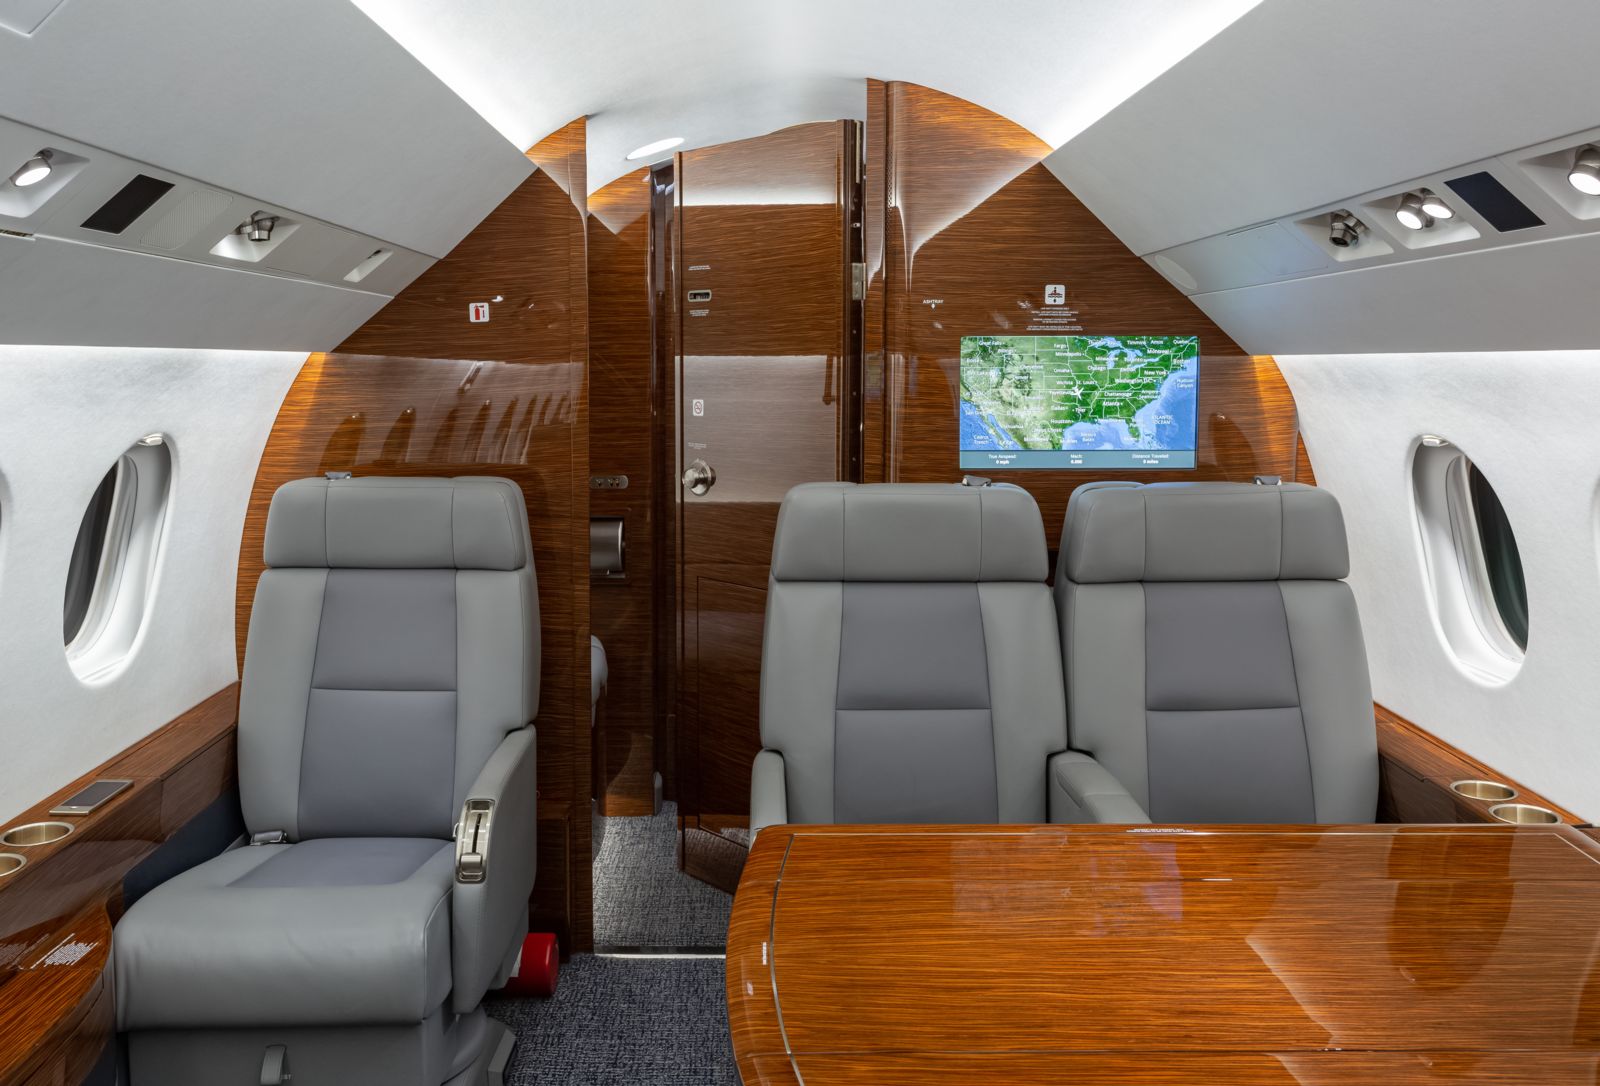 Dassault Falcon 2000LX  S/N 262 for sale | gallery image: /userfiles/files/bfp_5554.jpg